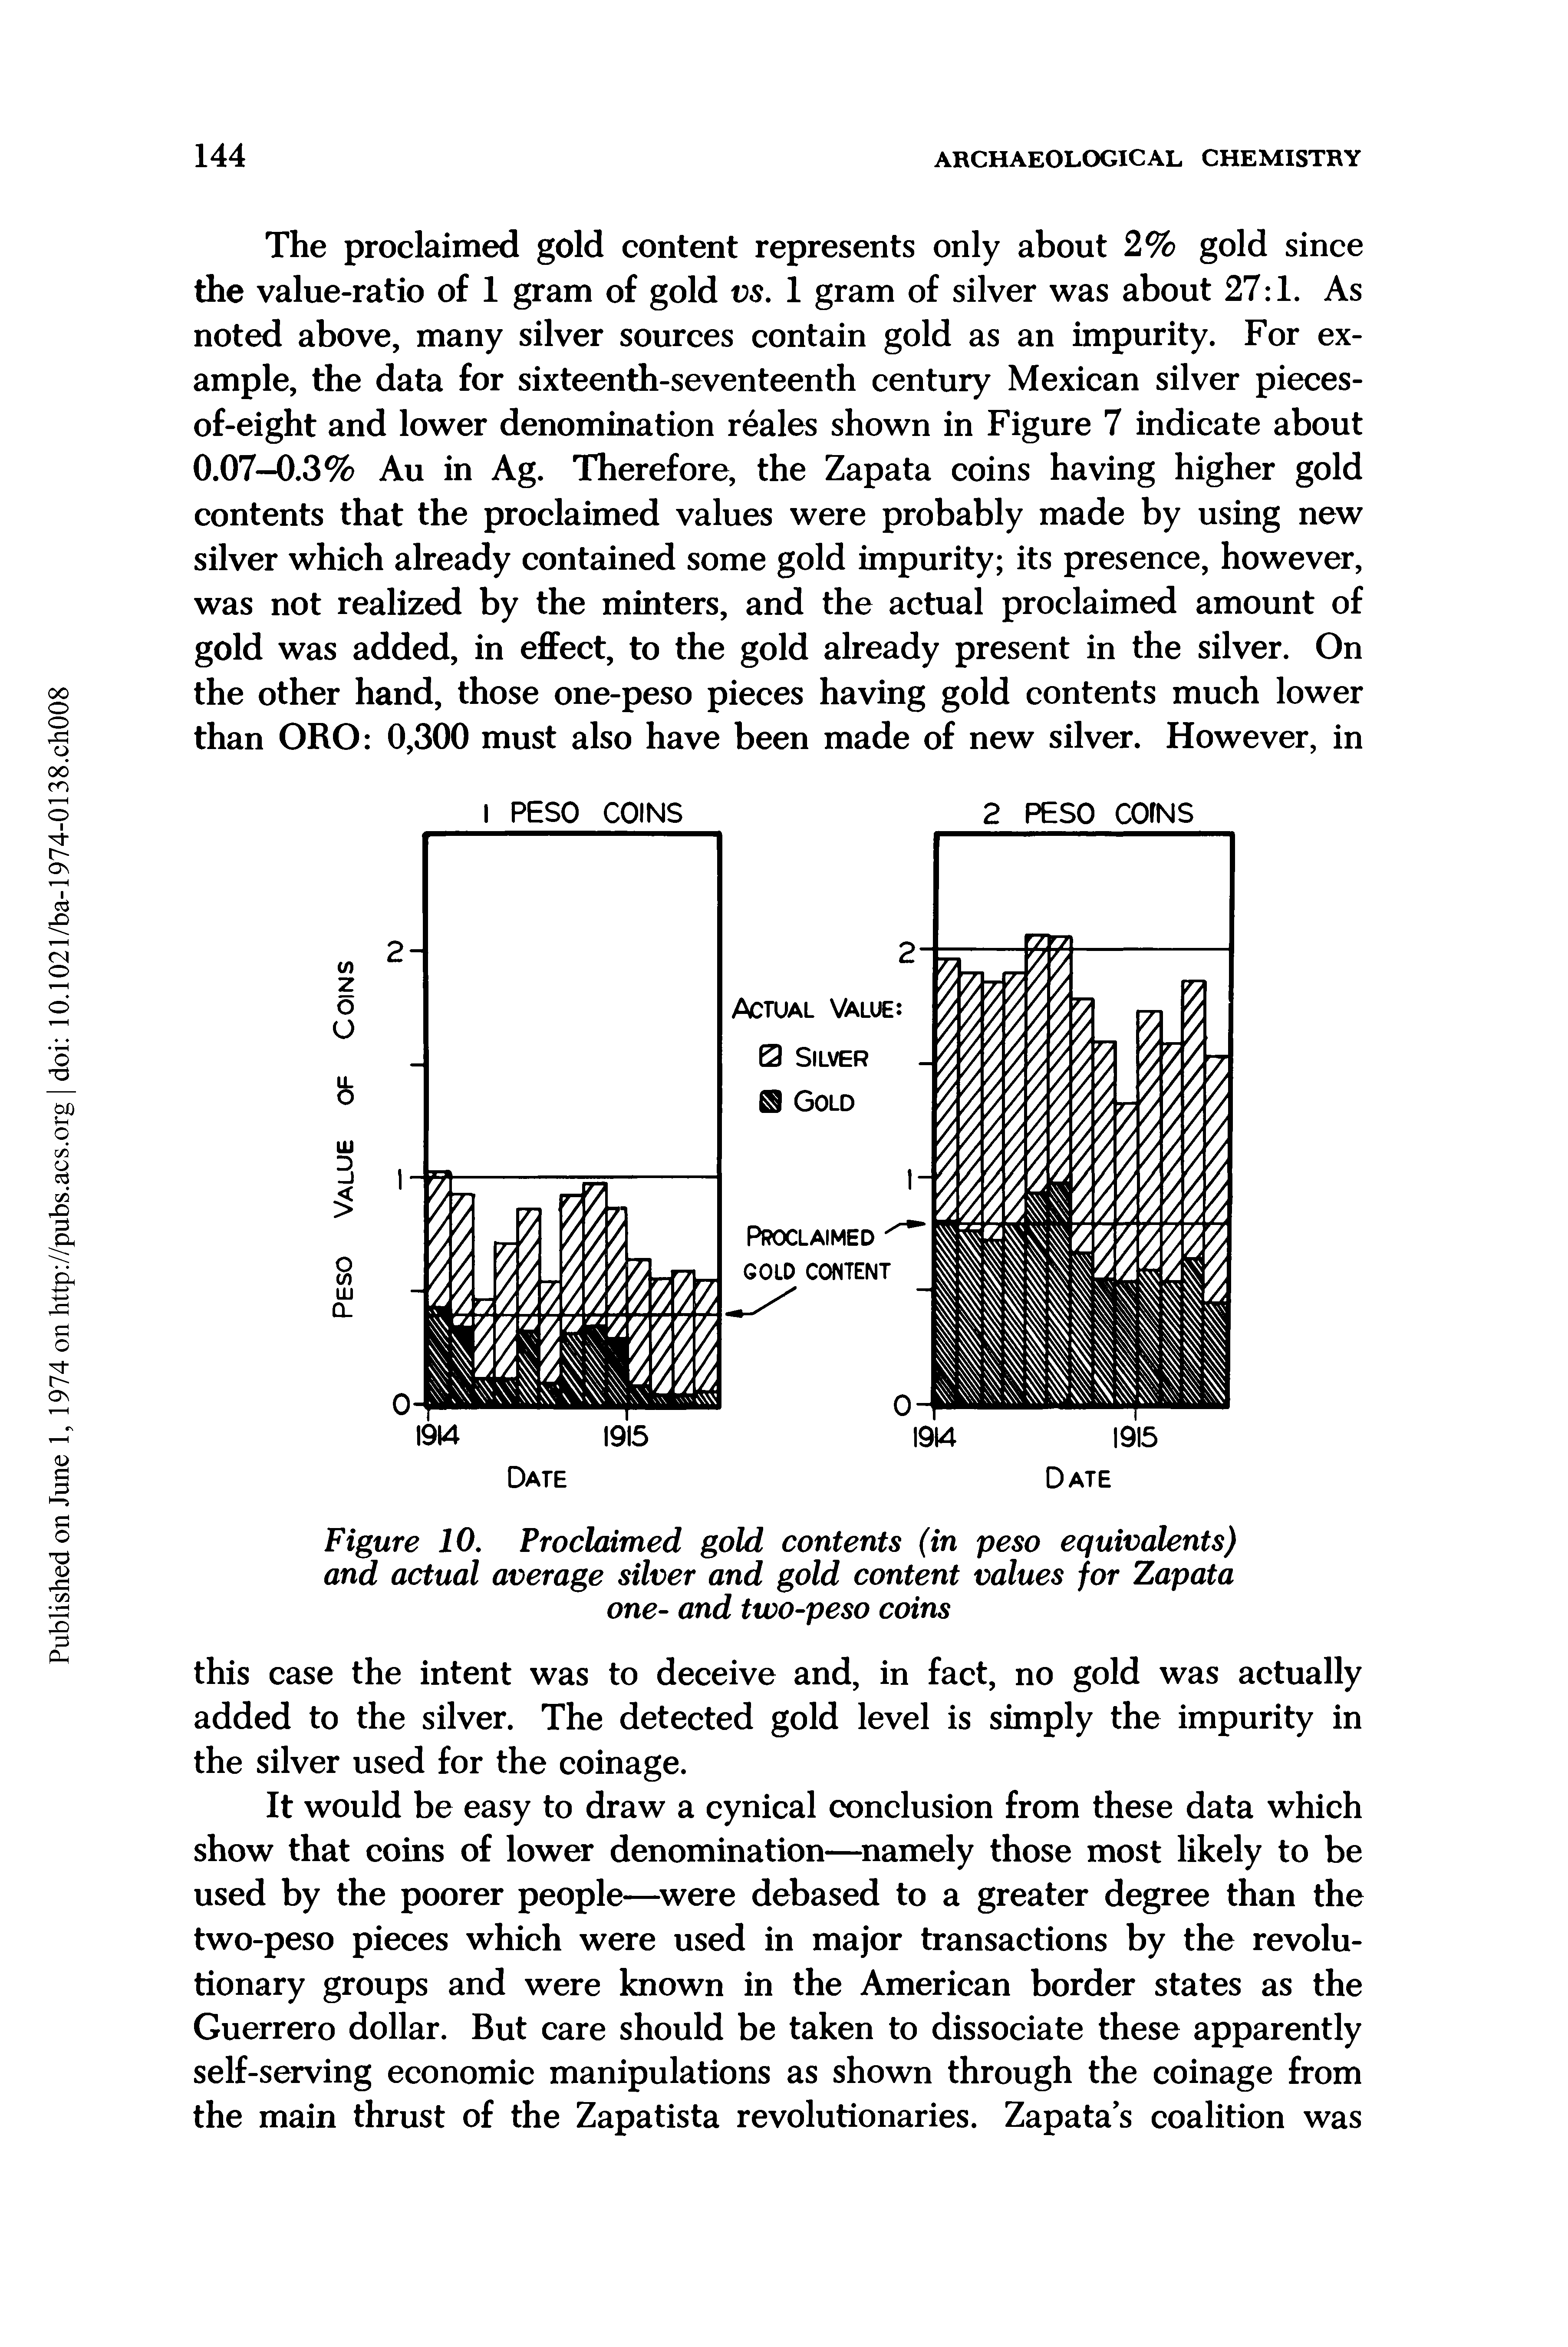 Figure 10. Proclaimed gold contents (in peso equivalents) and actual average silver and gold content values for Zapata one- and two-peso coins...